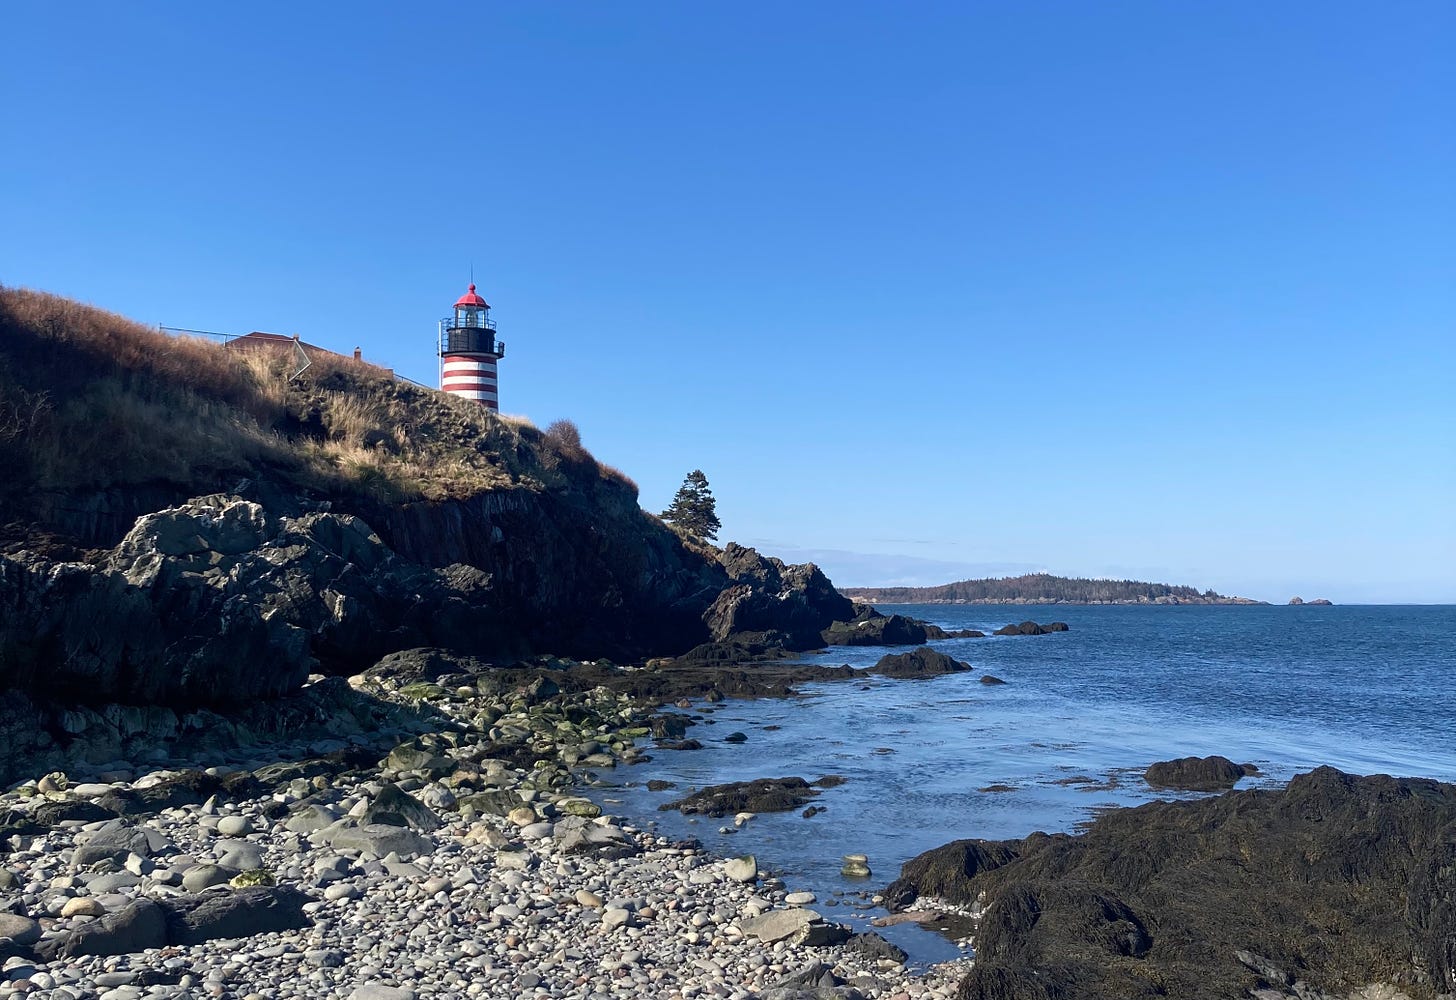 A rocky beach with blue ocean and sea grasses in the foreground. A red and white ringed lighthouse peeks out from behind a grass-covered cliff in the midground, with a pine tree nearer to the water. In the background is a near island and blue sky.